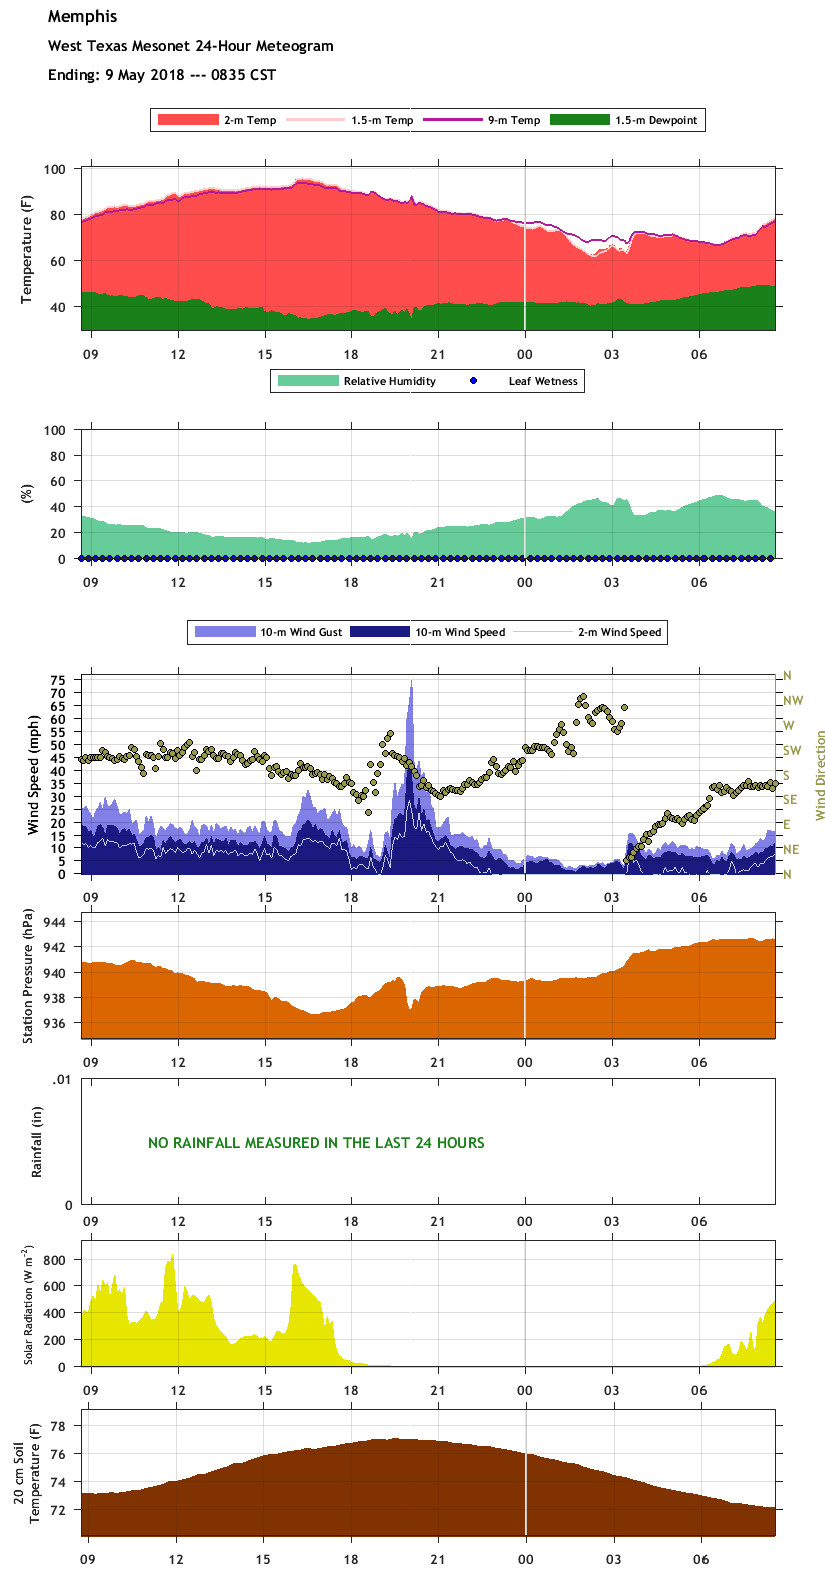 Time series of the West Texas Mesonet site near Memphis.